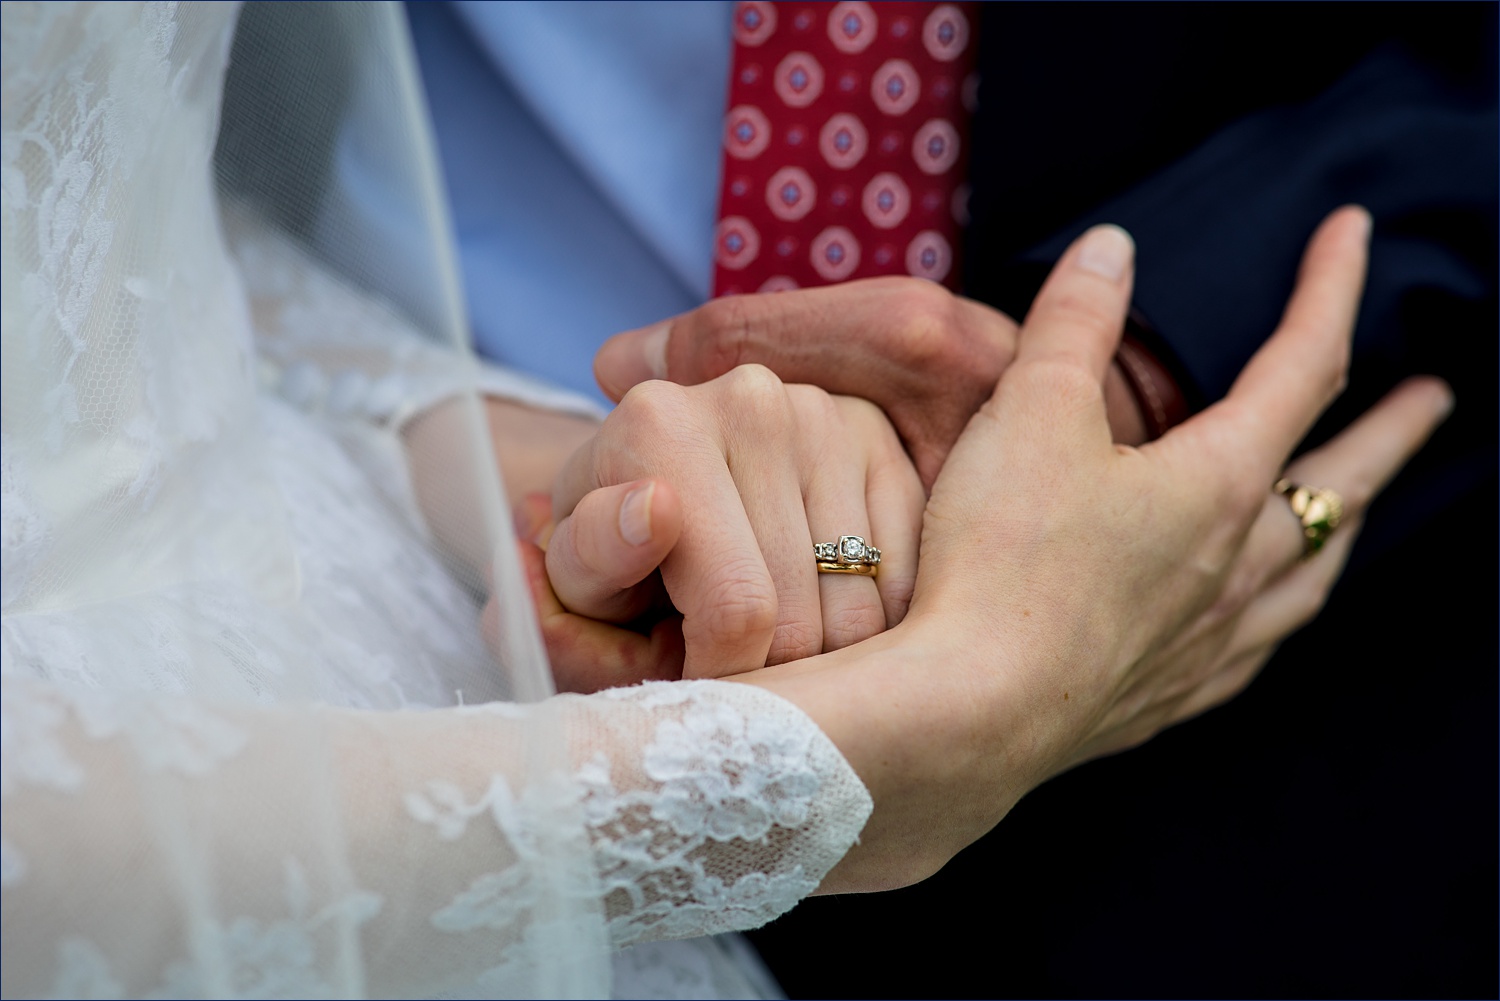 The bride and groom clasp hands together on their wedding day